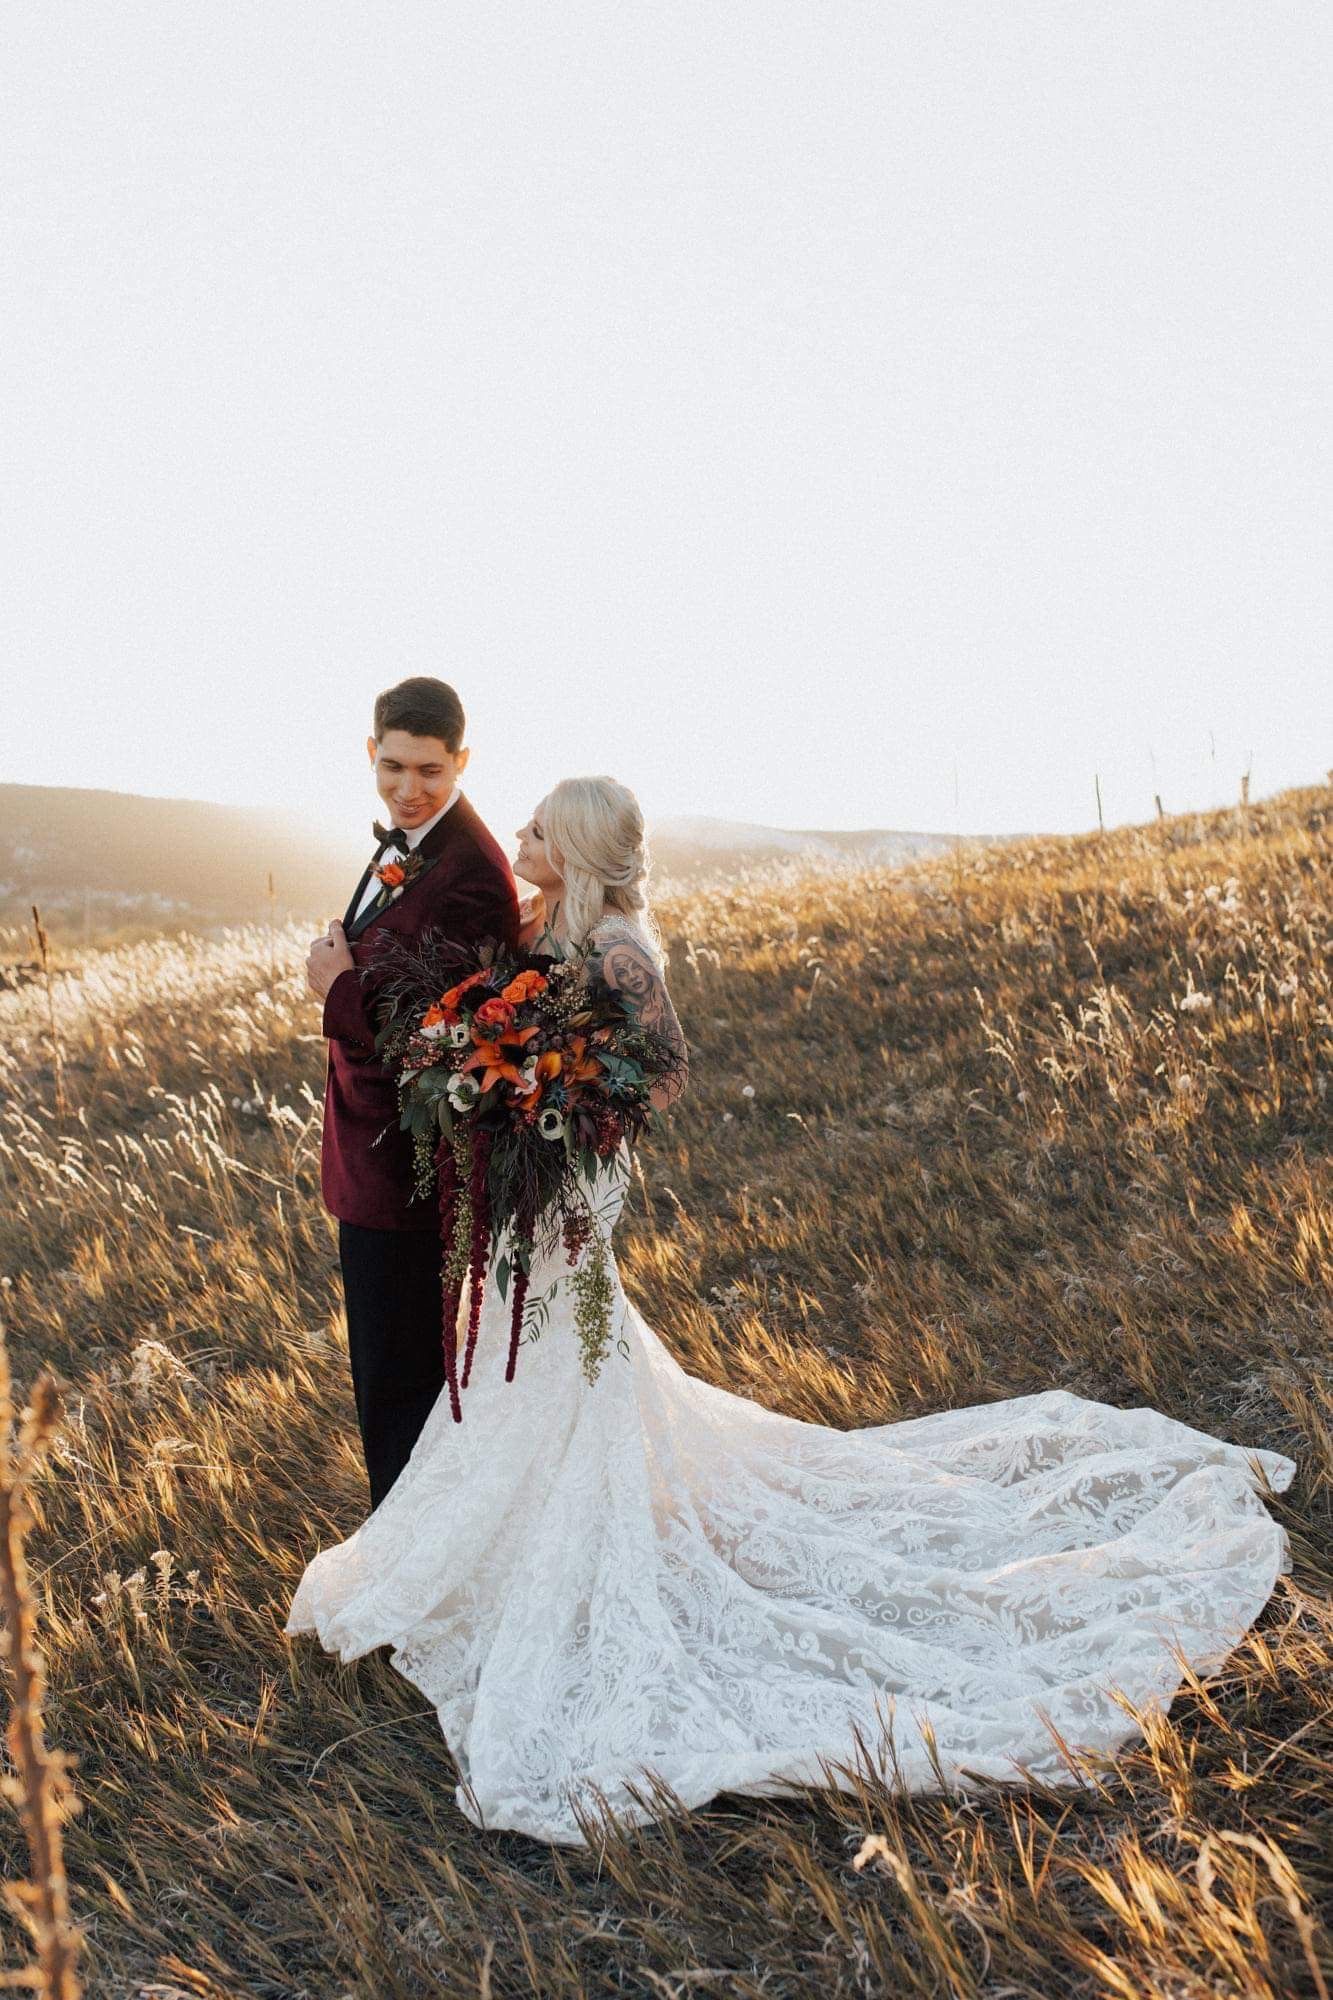 bride and groom embracing at dreamy outdoor fall wedding